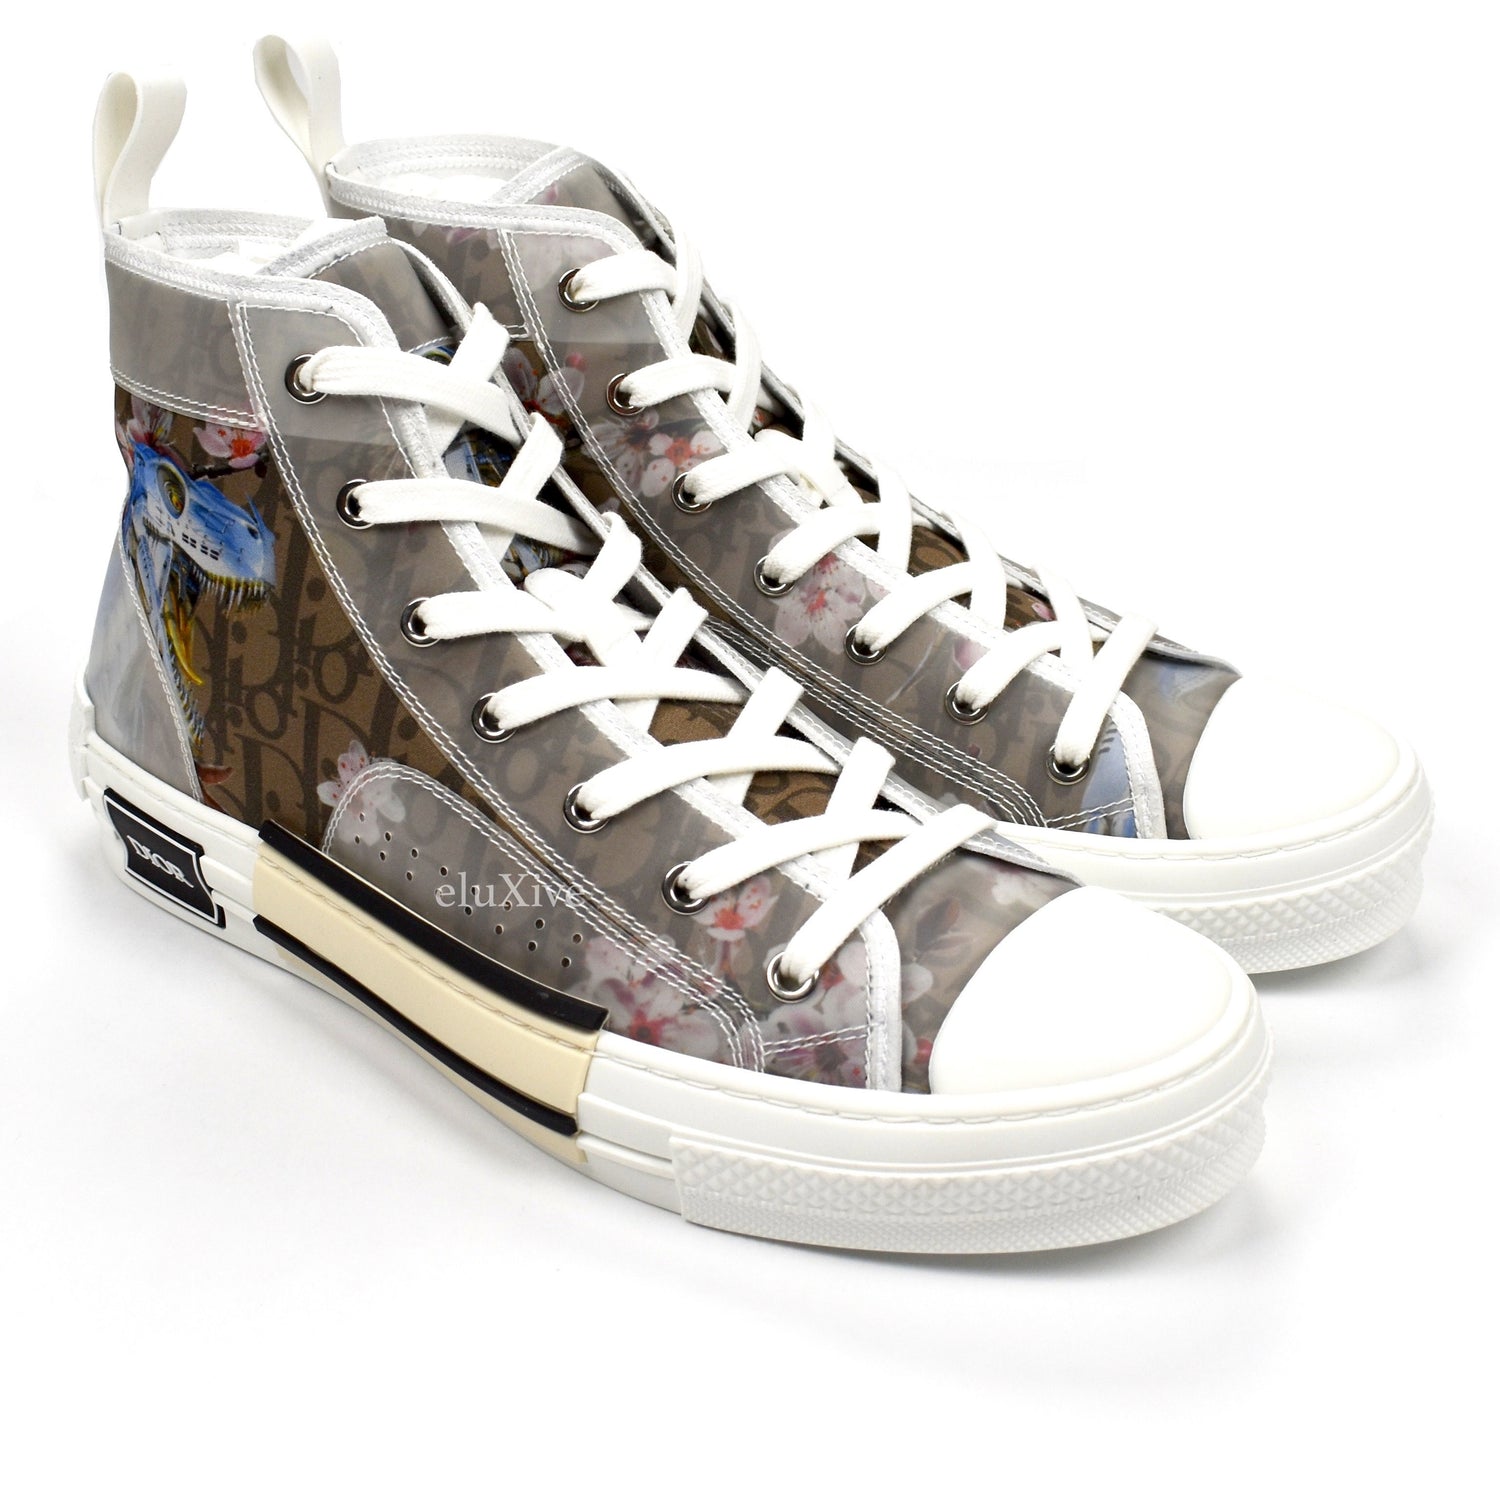 Dior Robot Dinosaur Air Force 1 With Matching Dior Socks  twopairshoes